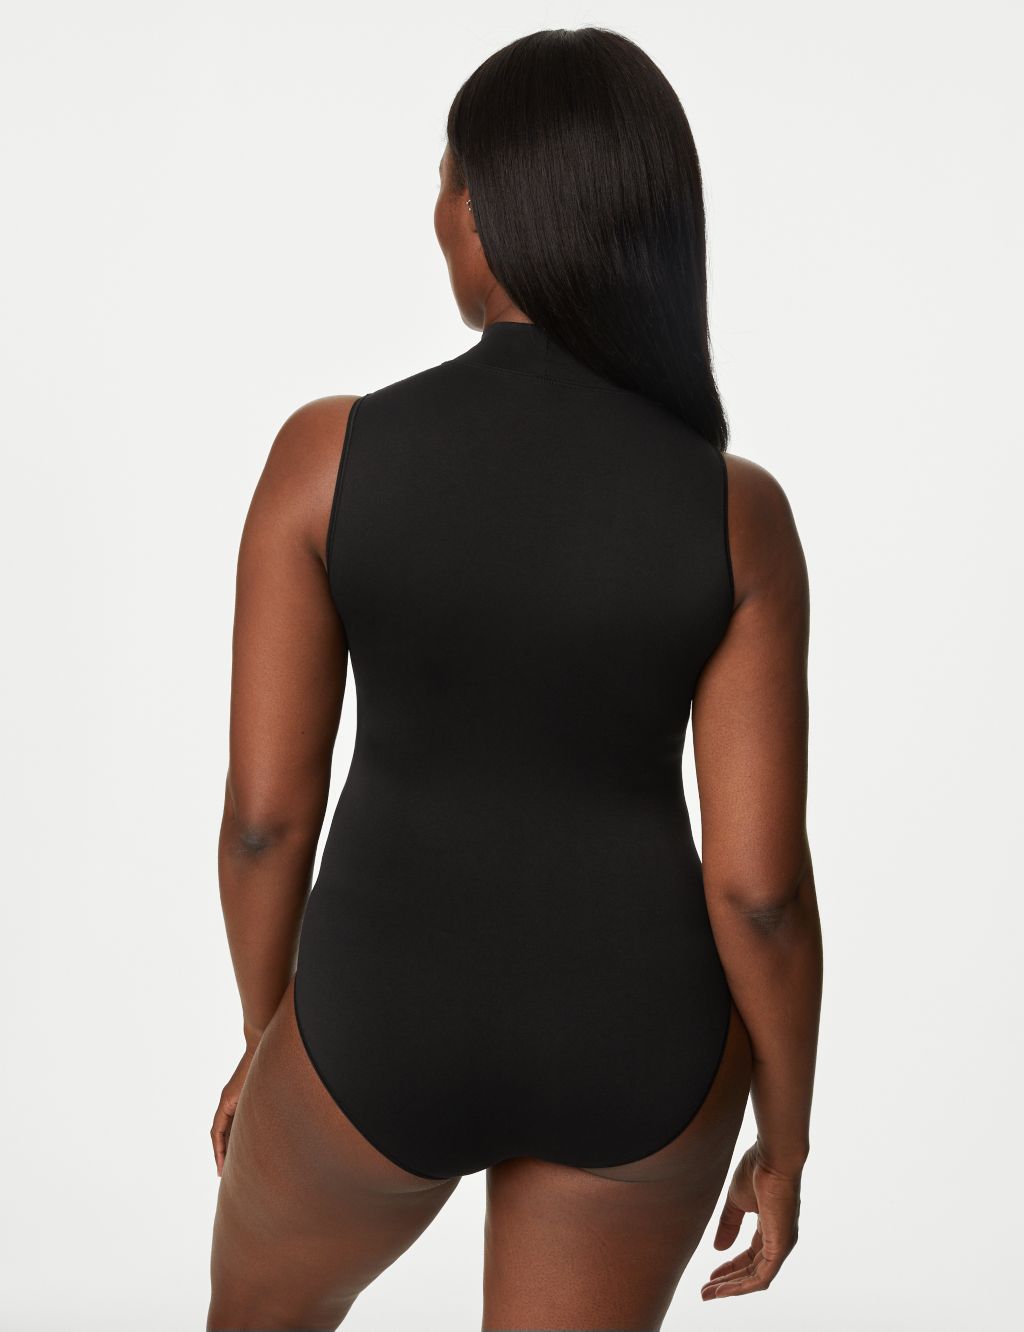 Smoothing Cool Comfort™ Shaping Body image 4